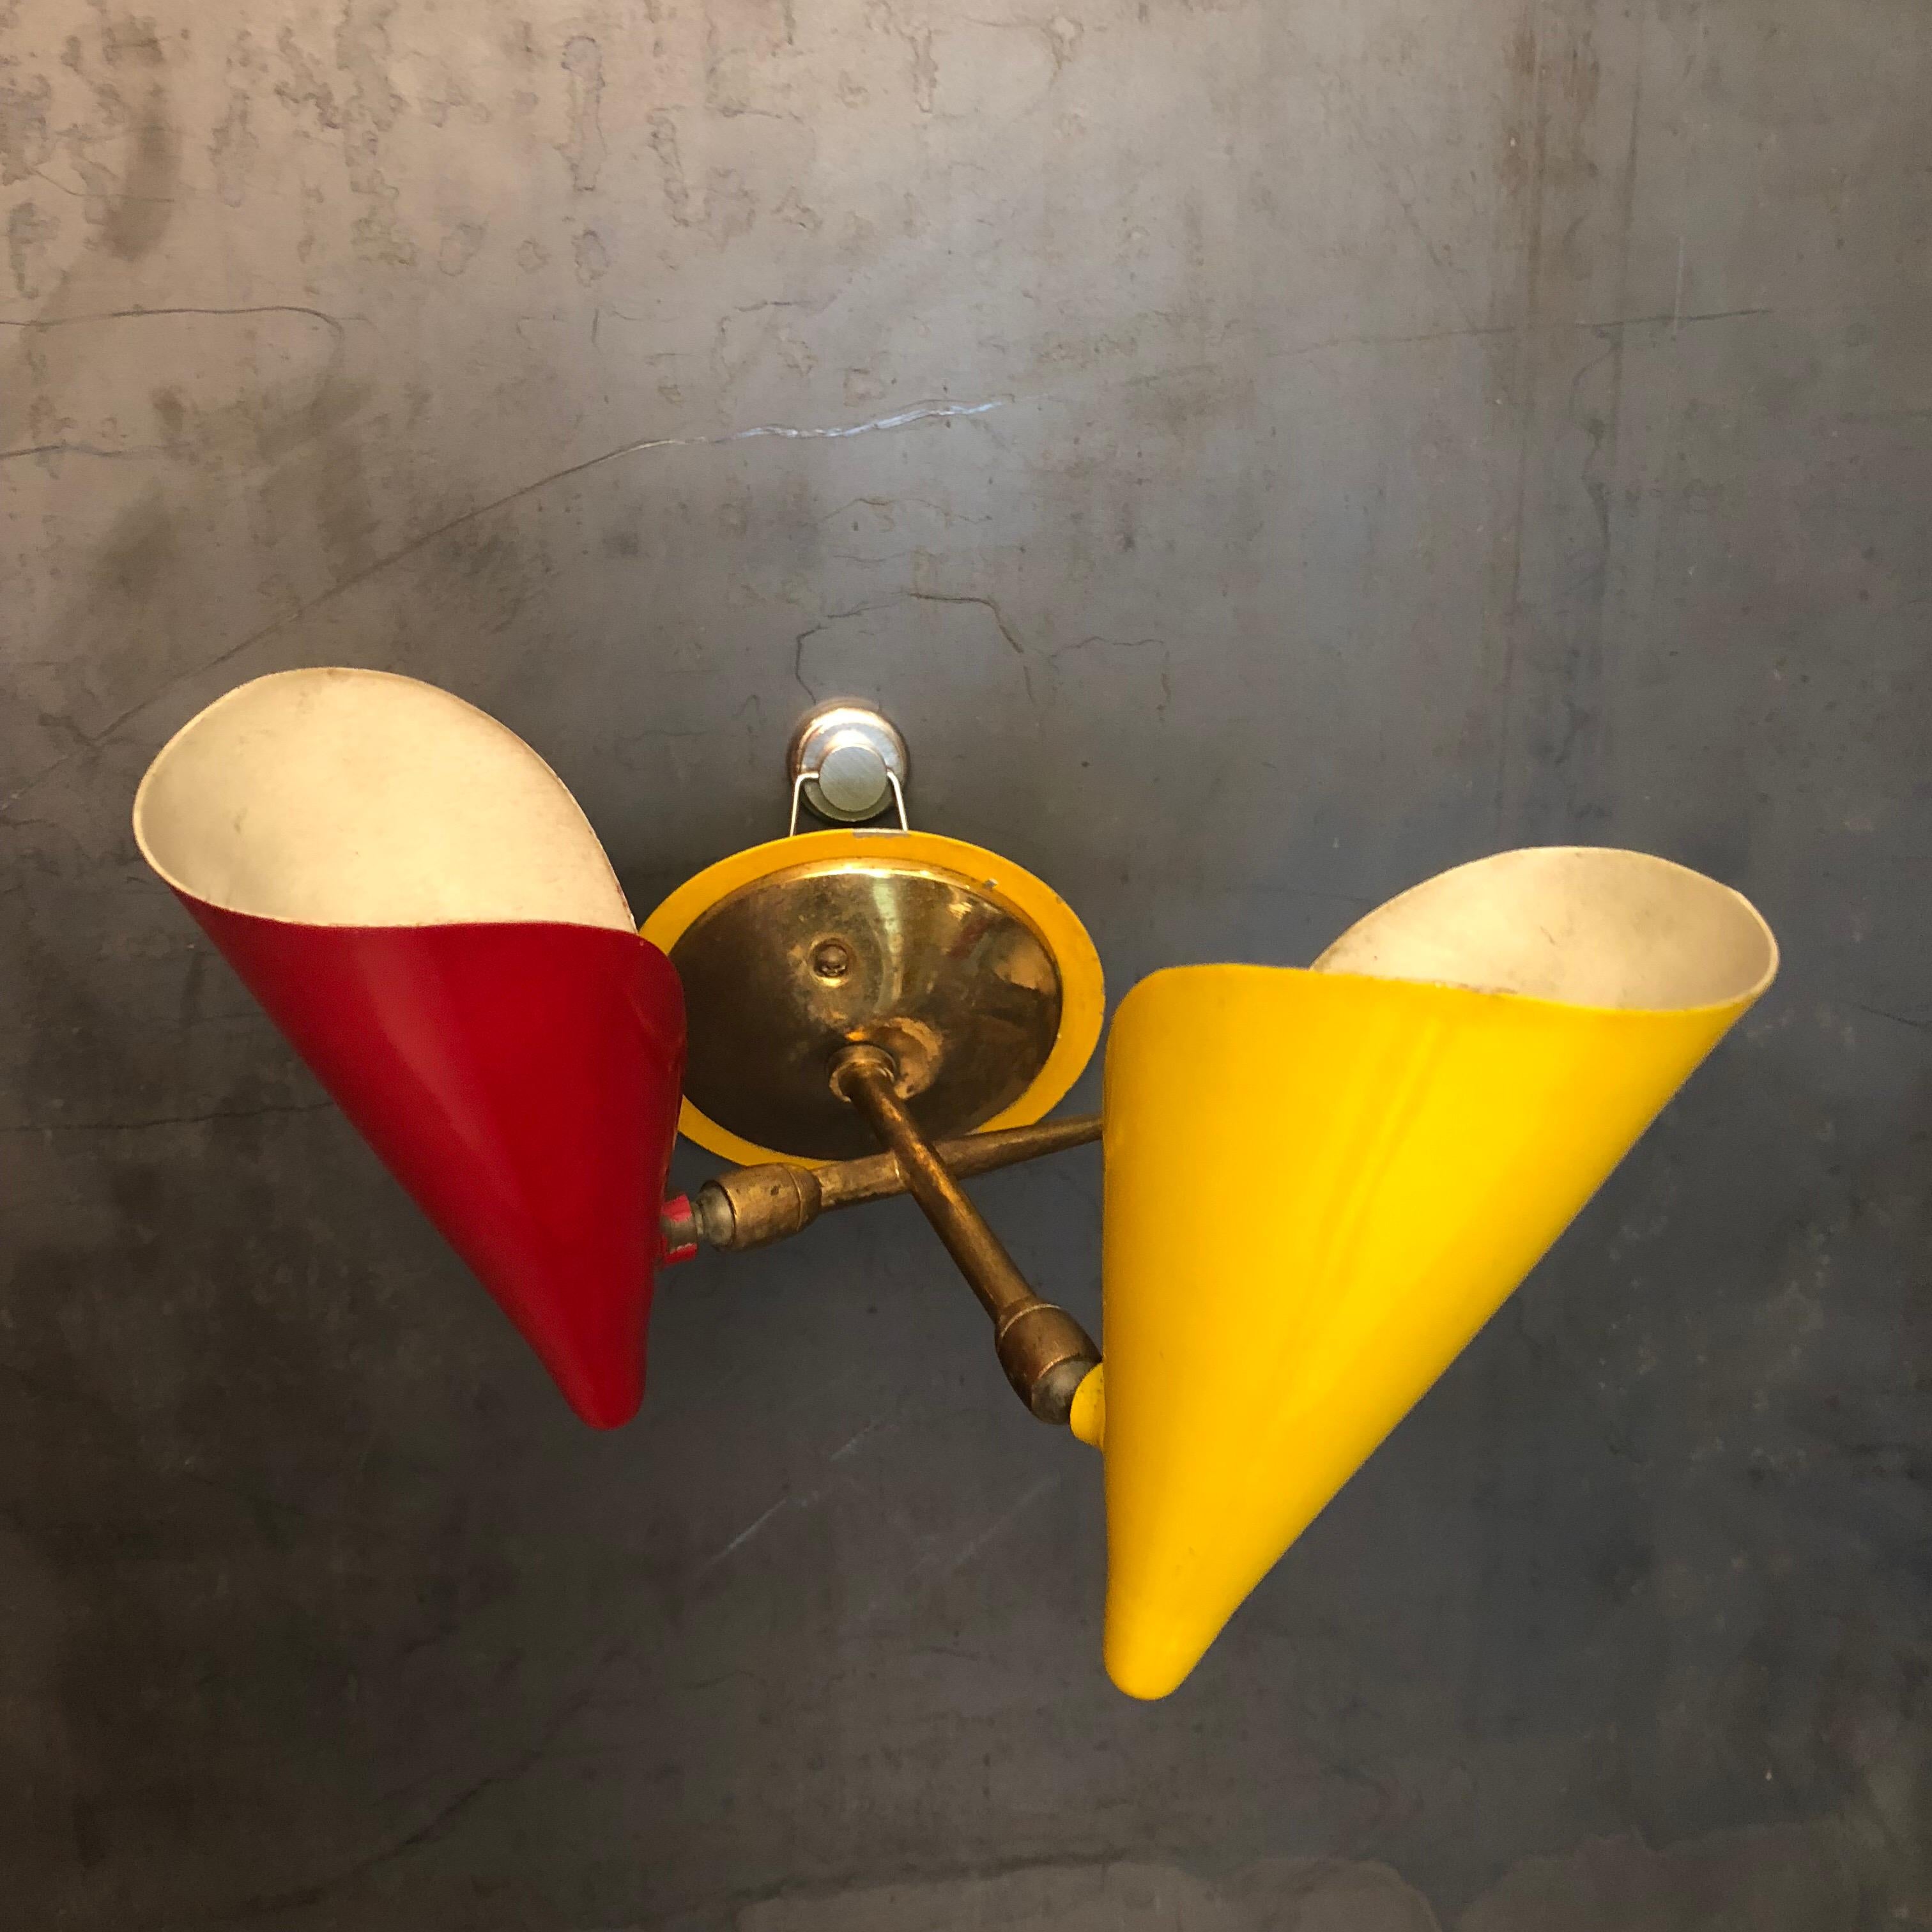 Italian Stilnovo Brass and Lacquered Metal Sconces with Double Cones, 1950s For Sale 3